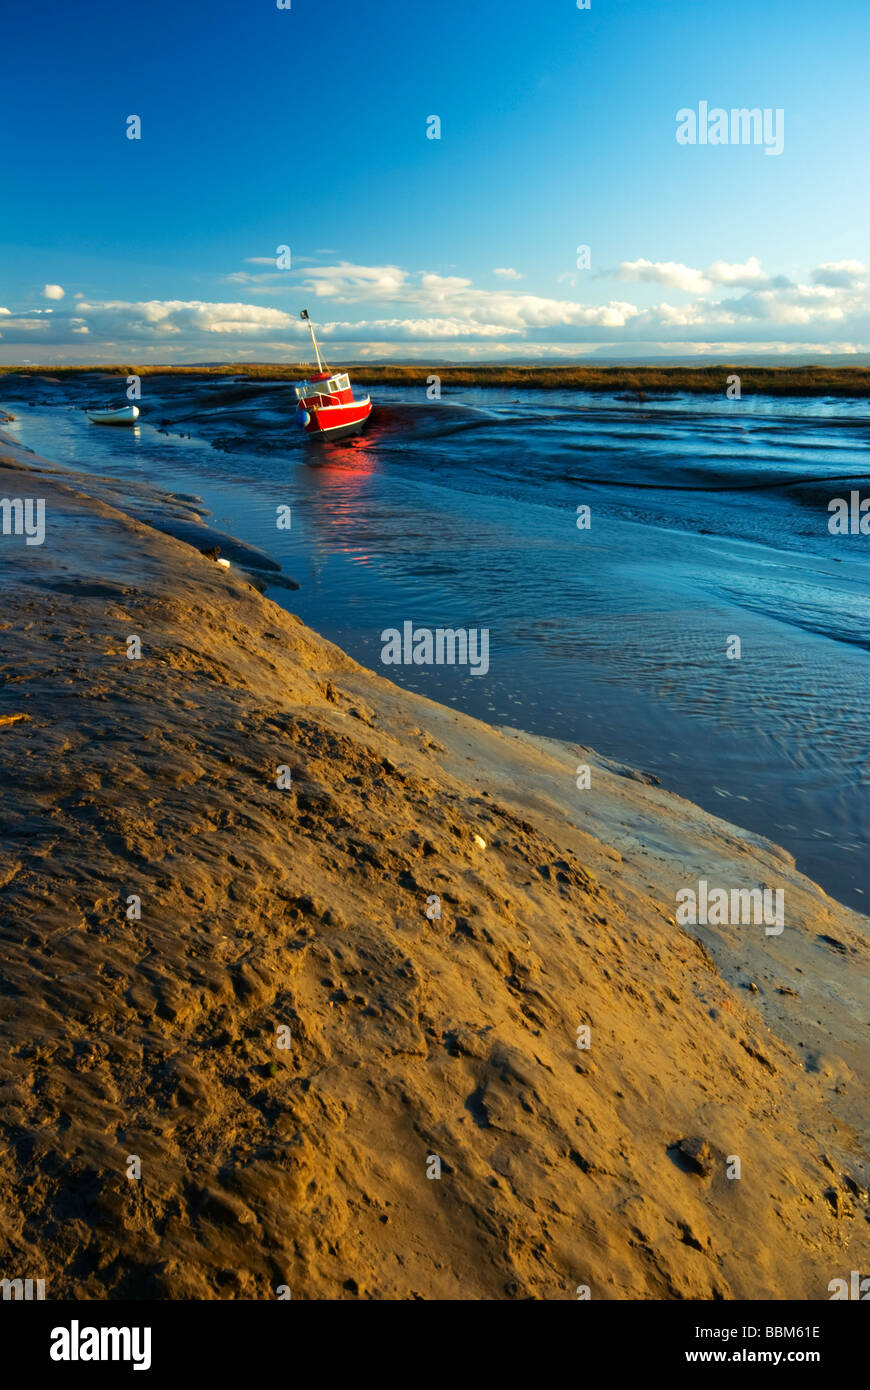 Boats tied up on at Heswall on the Wirral Peninsula. UK GB England EU Europe Stock Photo